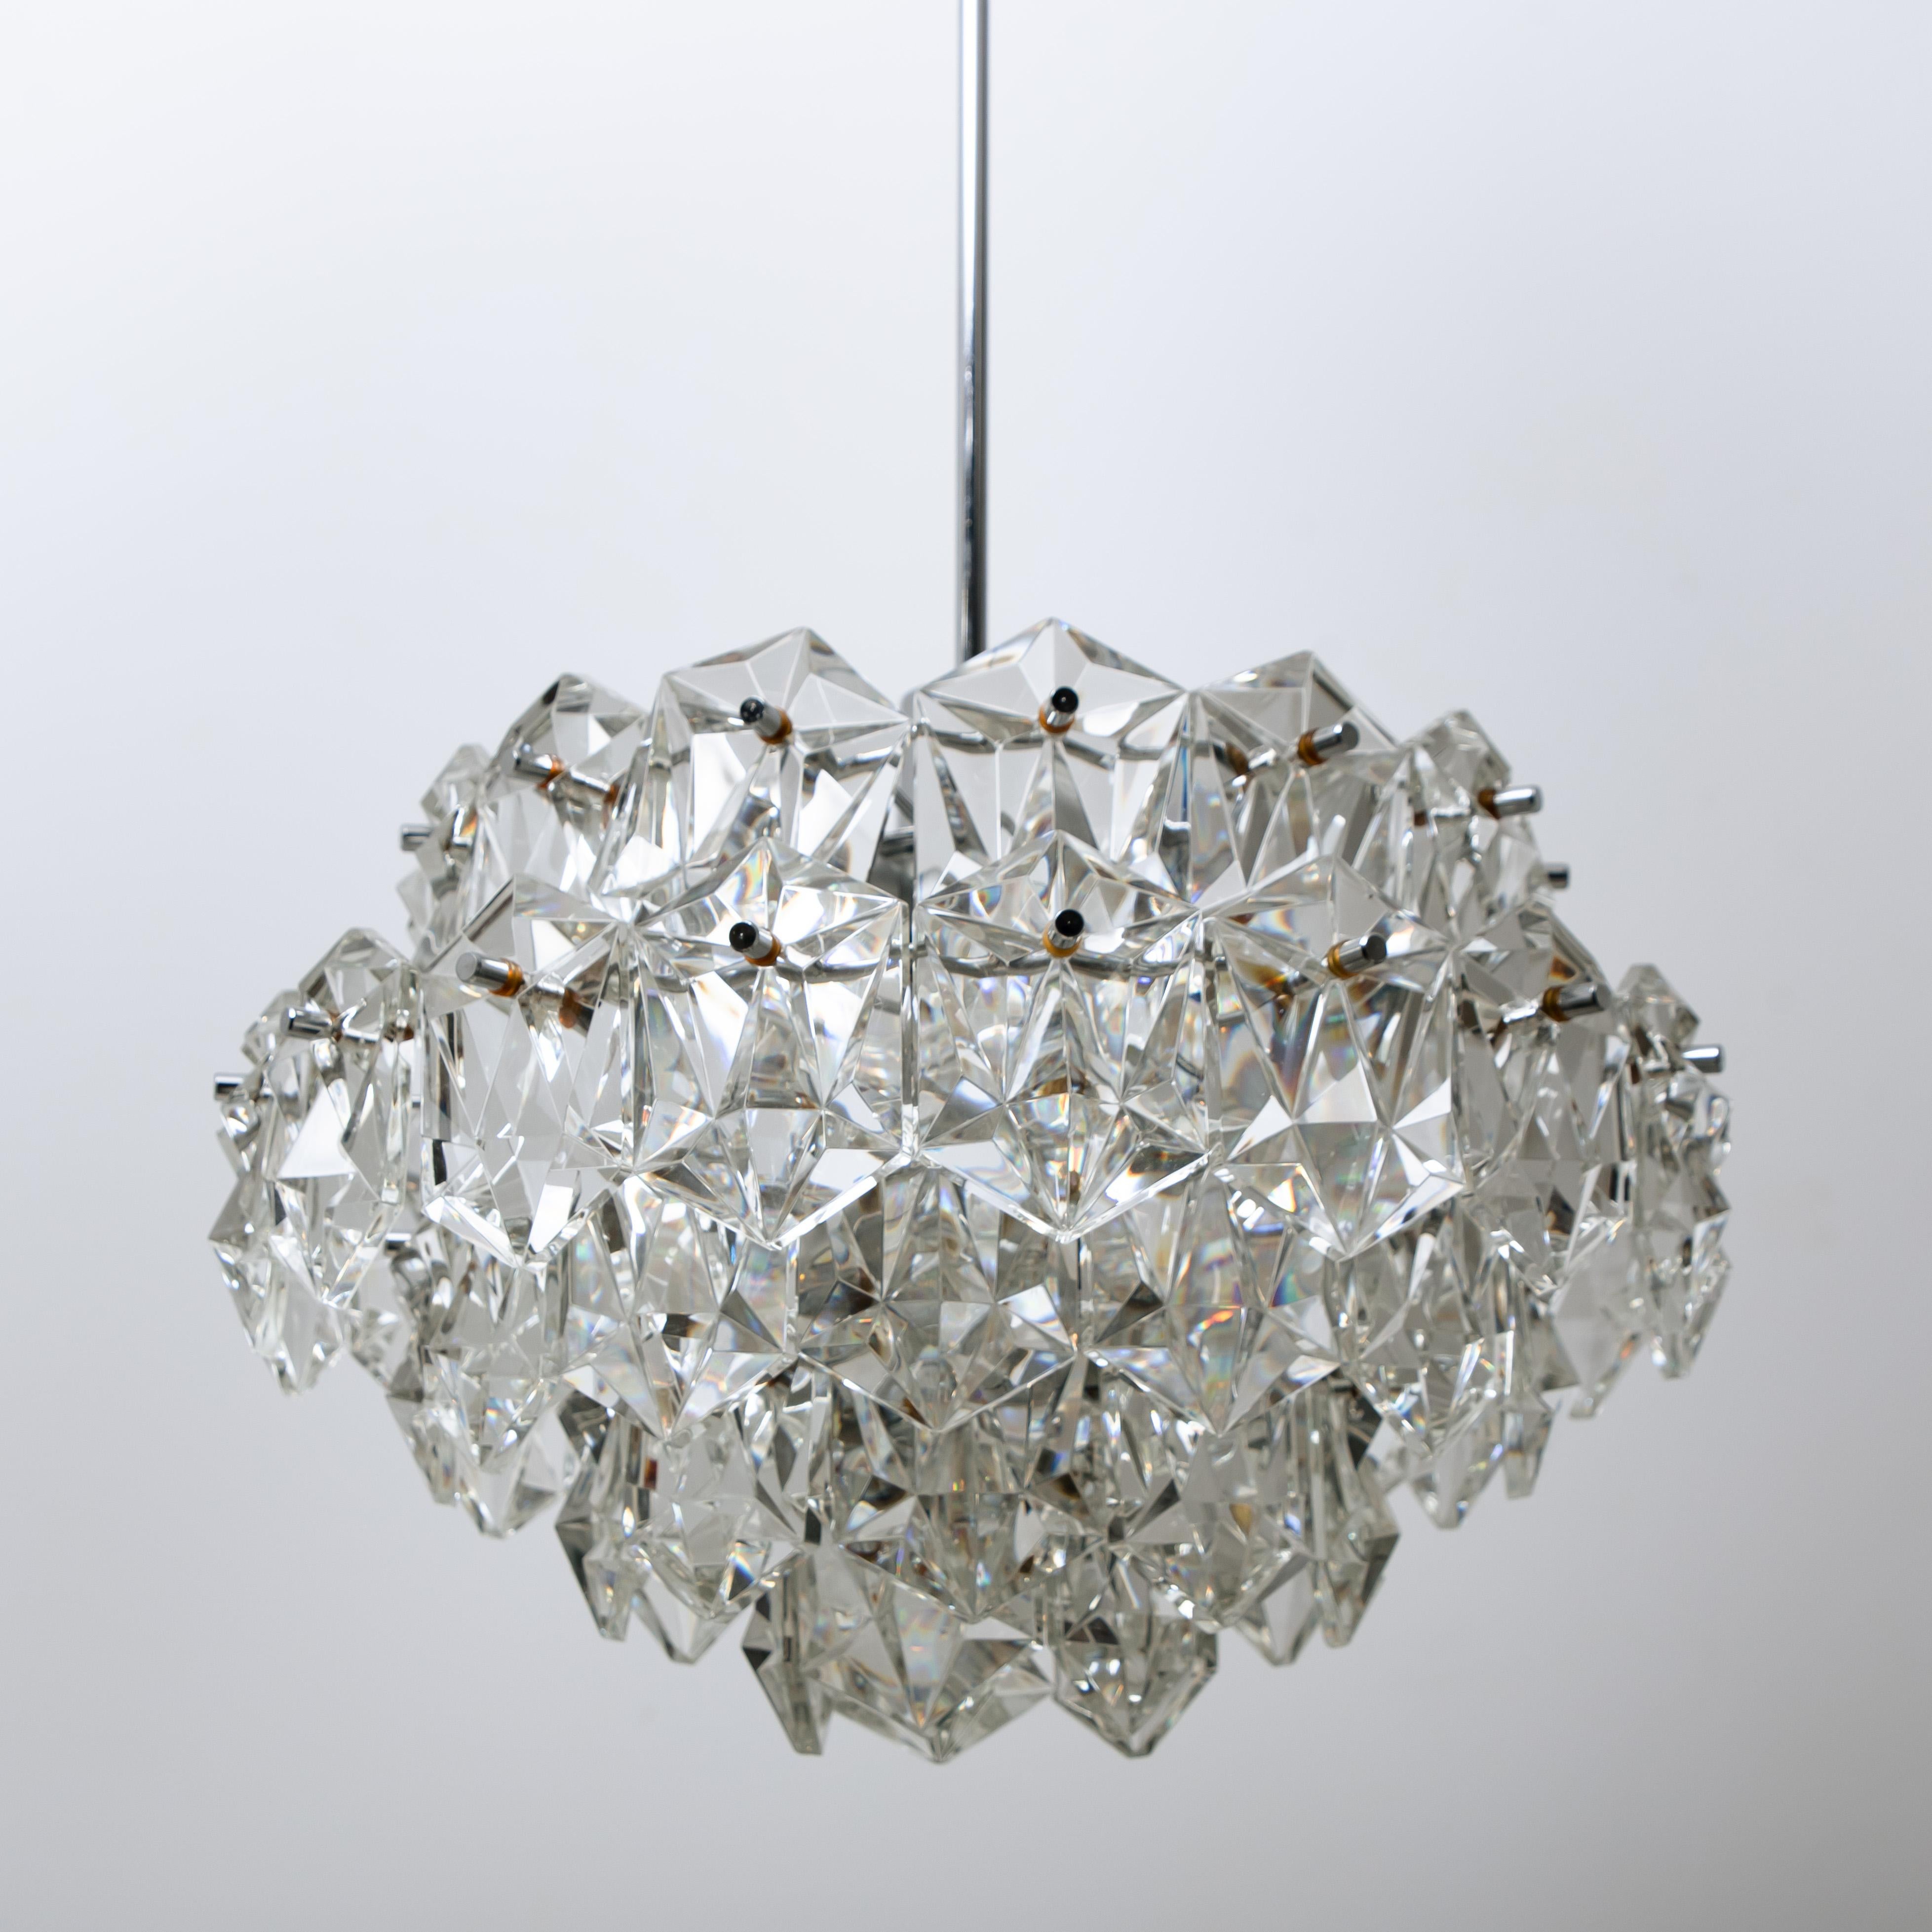 OTT Chrome and Crystal Chandelier, 1970s For Sale 5